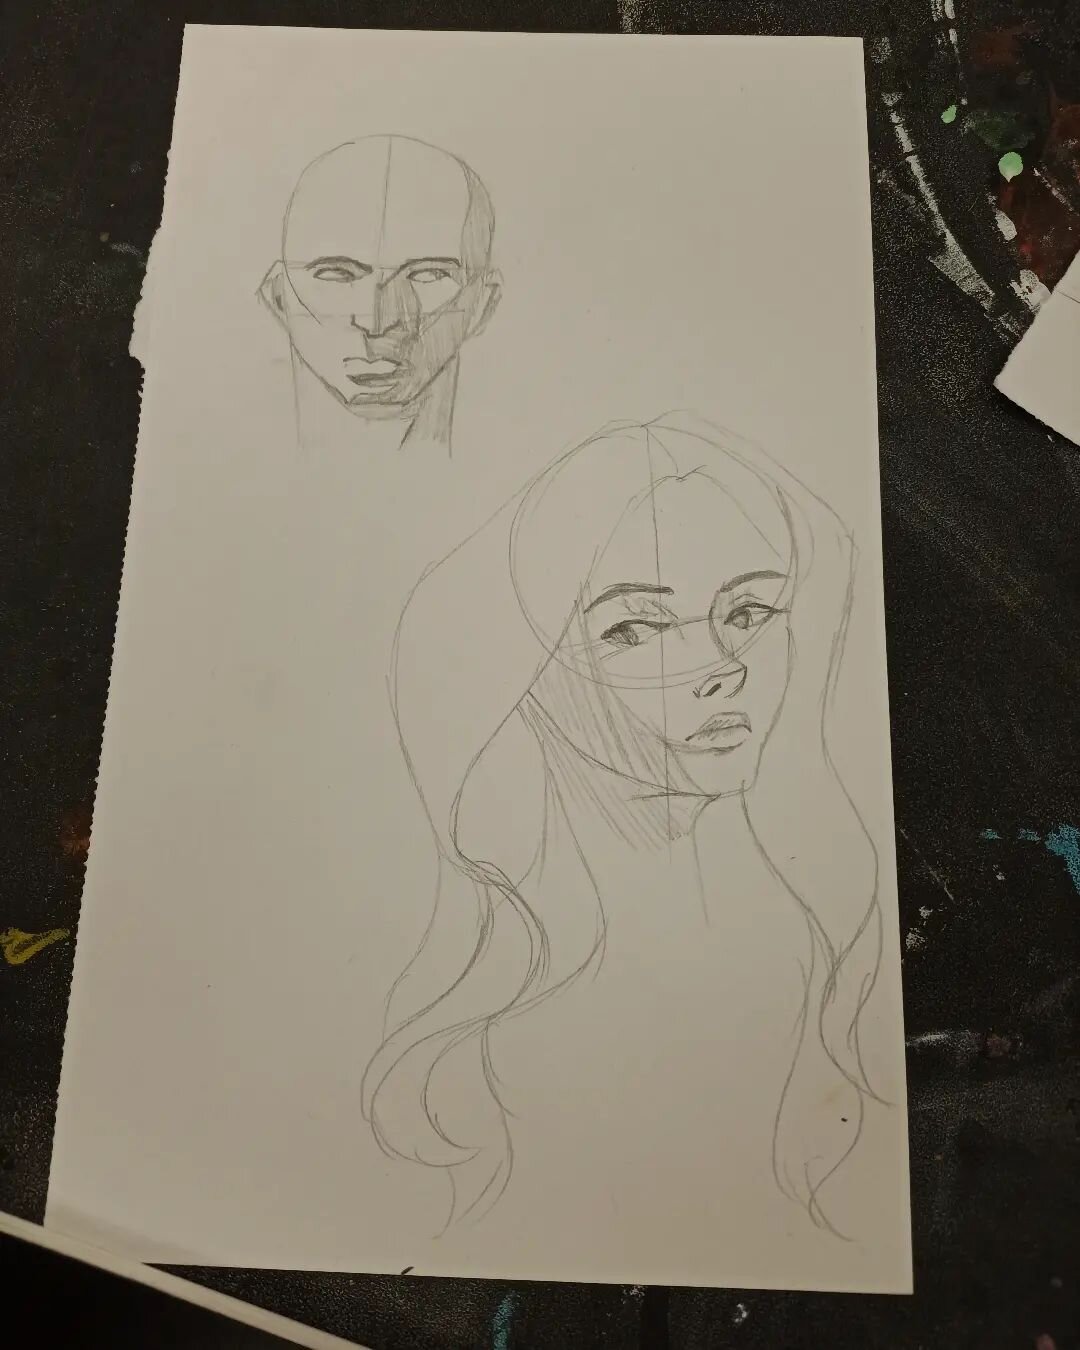 Our drawing students are working on different angles of shading with faces and absolutely crushing it!
.
#newcottagearts #newcottageartsdenver #drawinglessons #drawingclasses #drawing #artlessons #art #artclasses